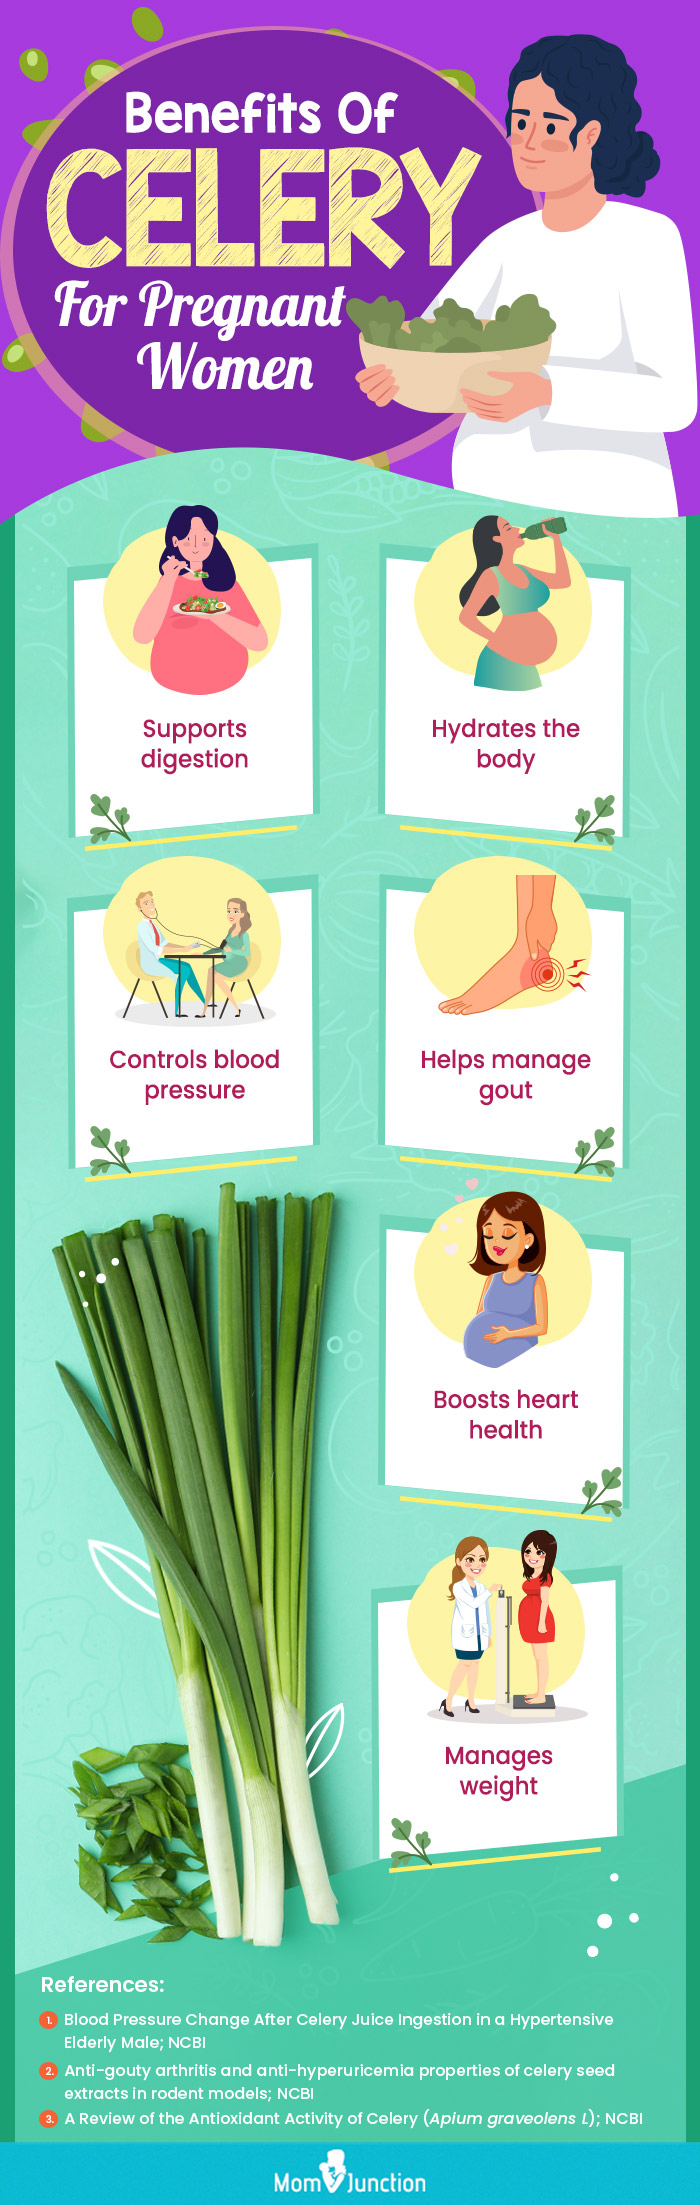 benefits of celery for pregnant women (infographic)